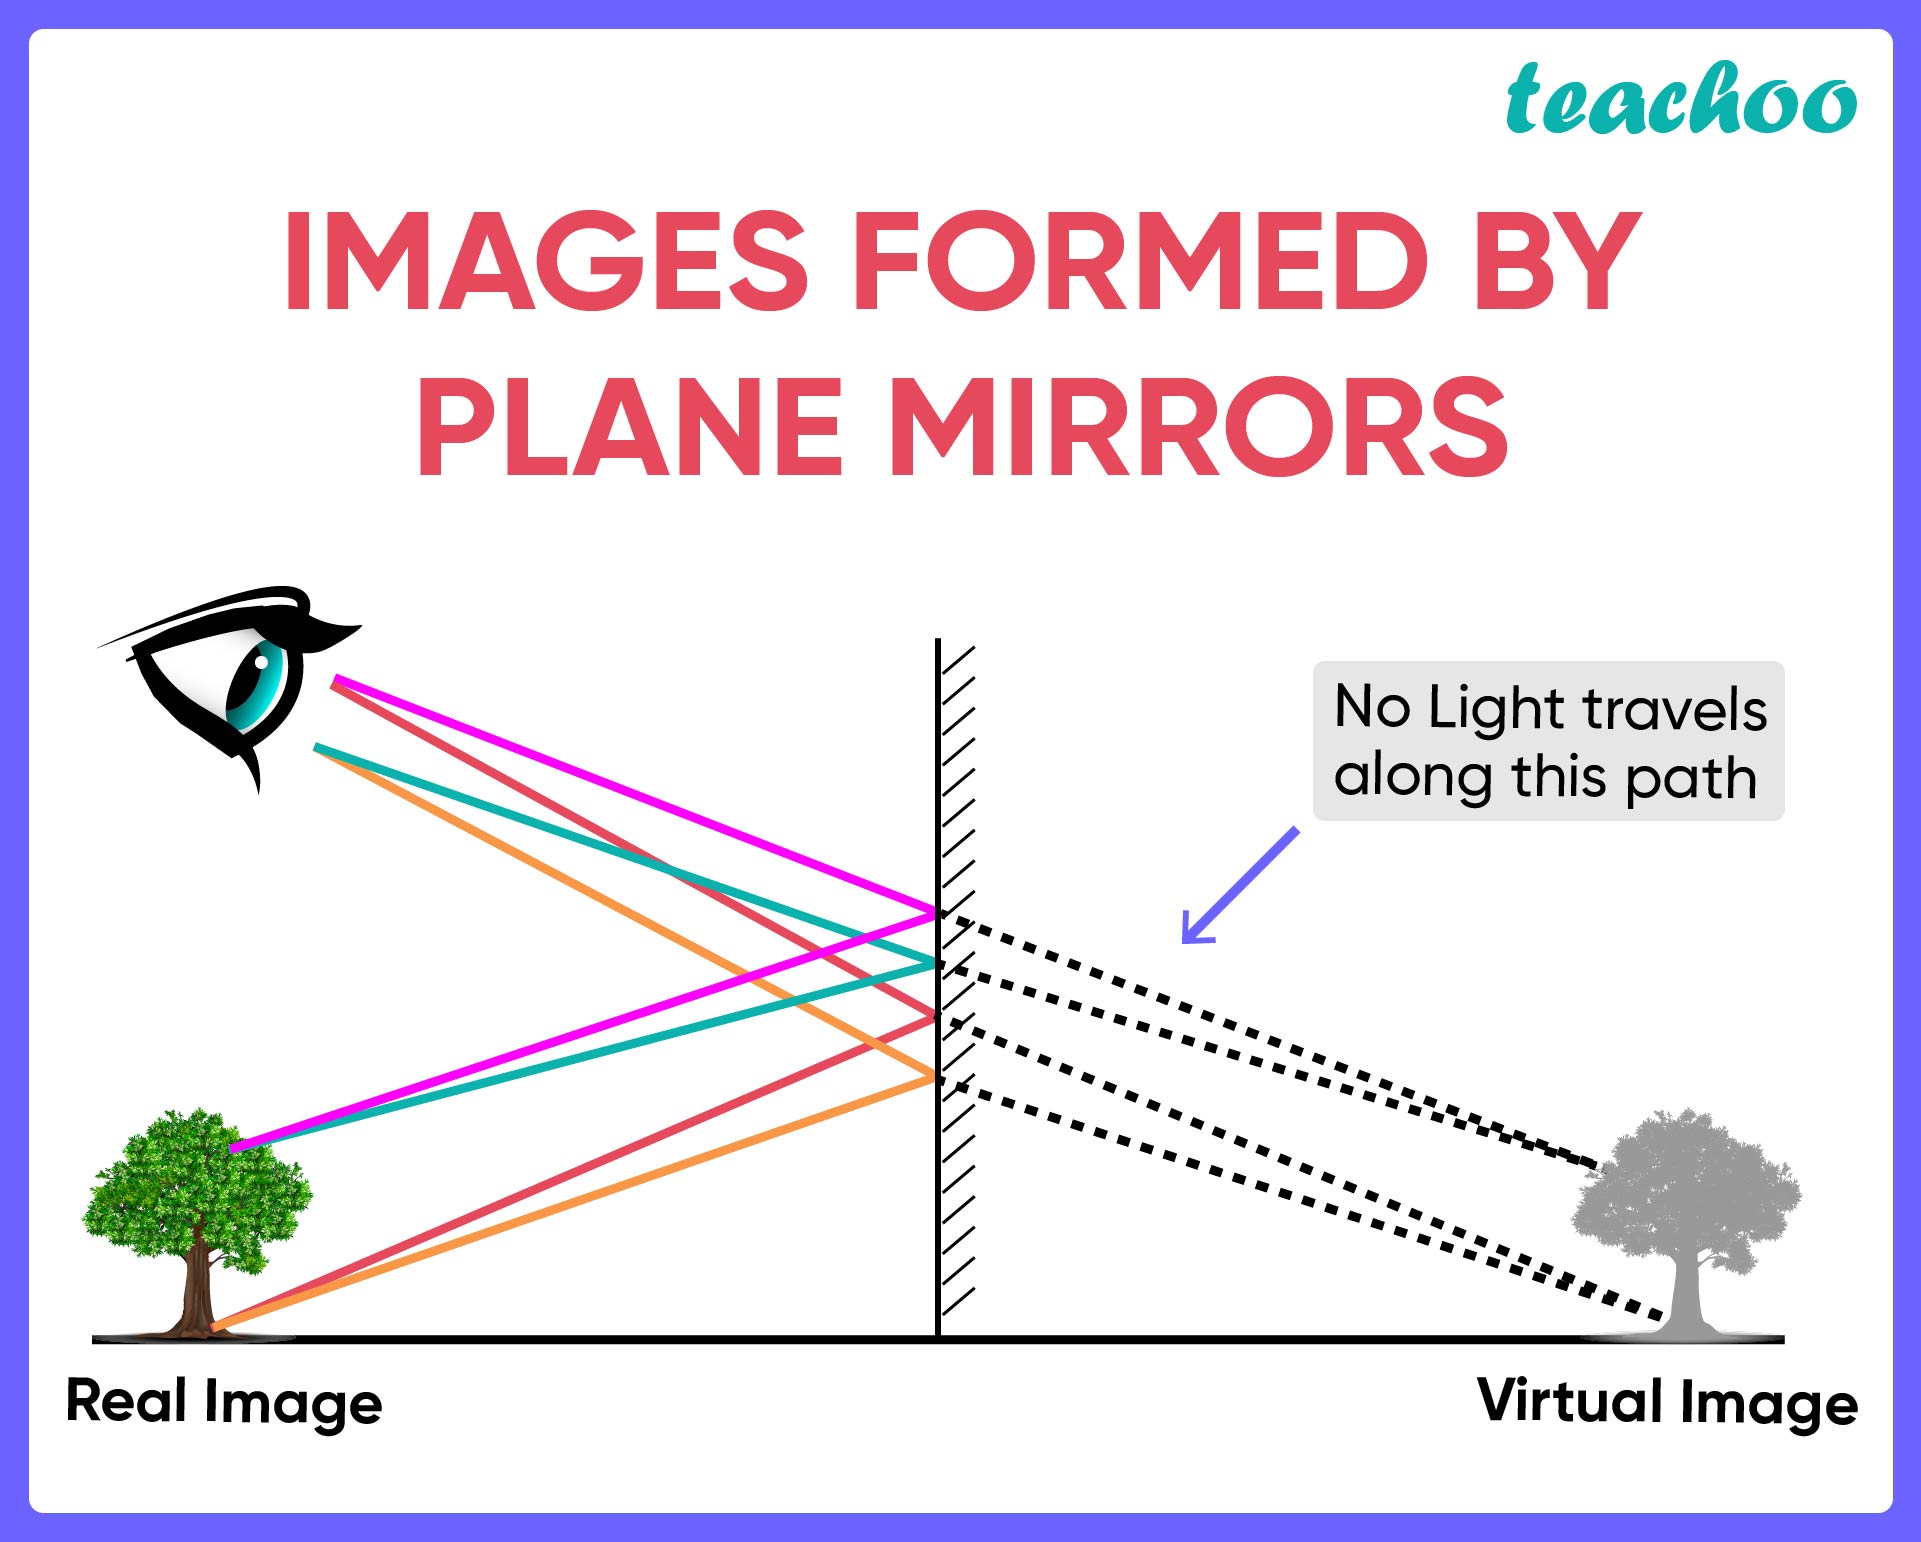 Characteristics Describes The Image Formed By A Plane Mirror